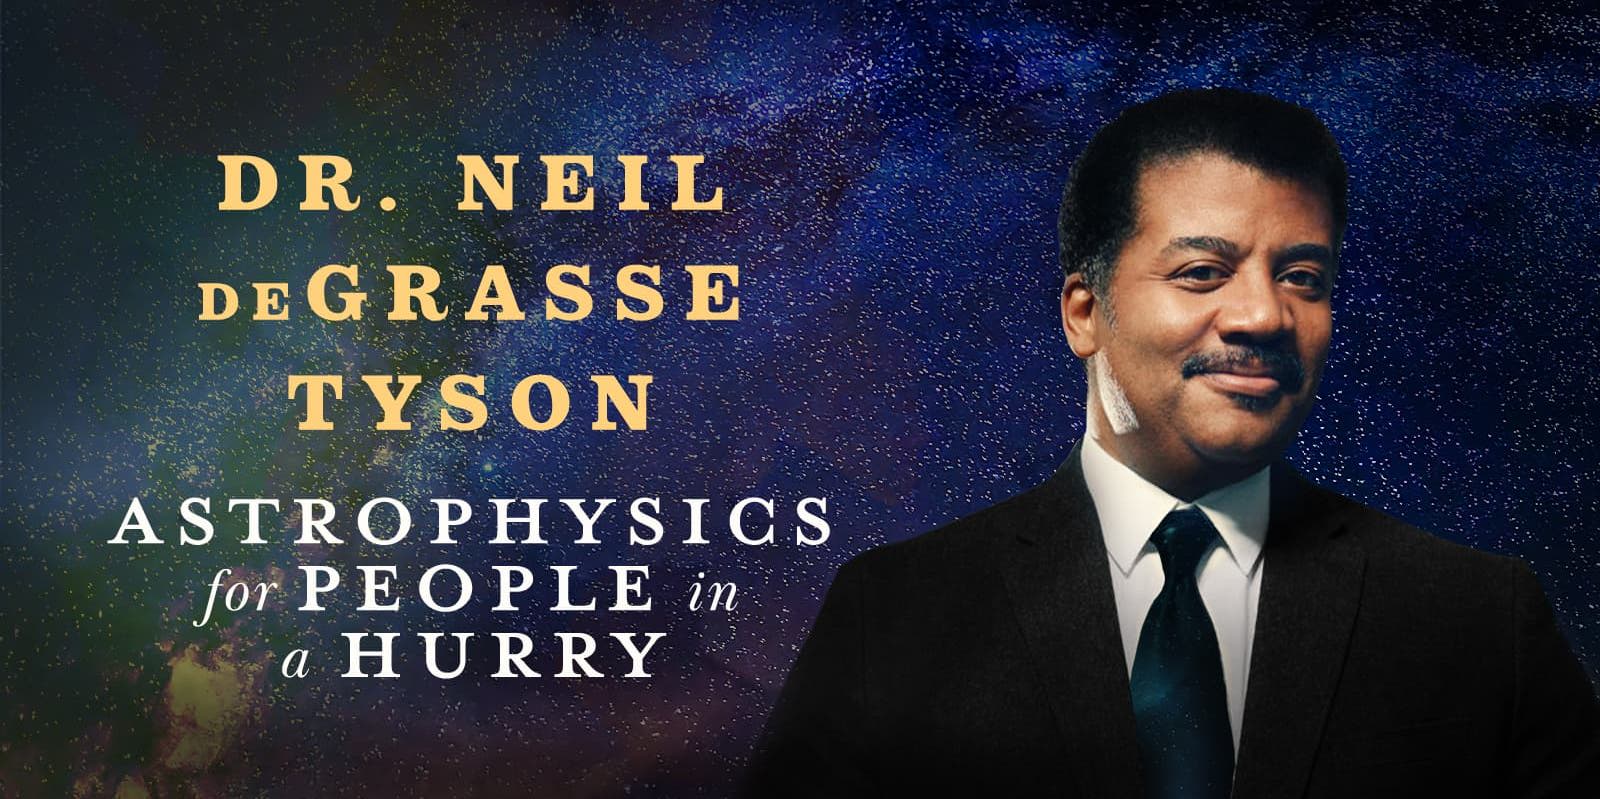 Dr. Neil DeGrasse Tyson - Astrophysics For People In A Hurry promotional image